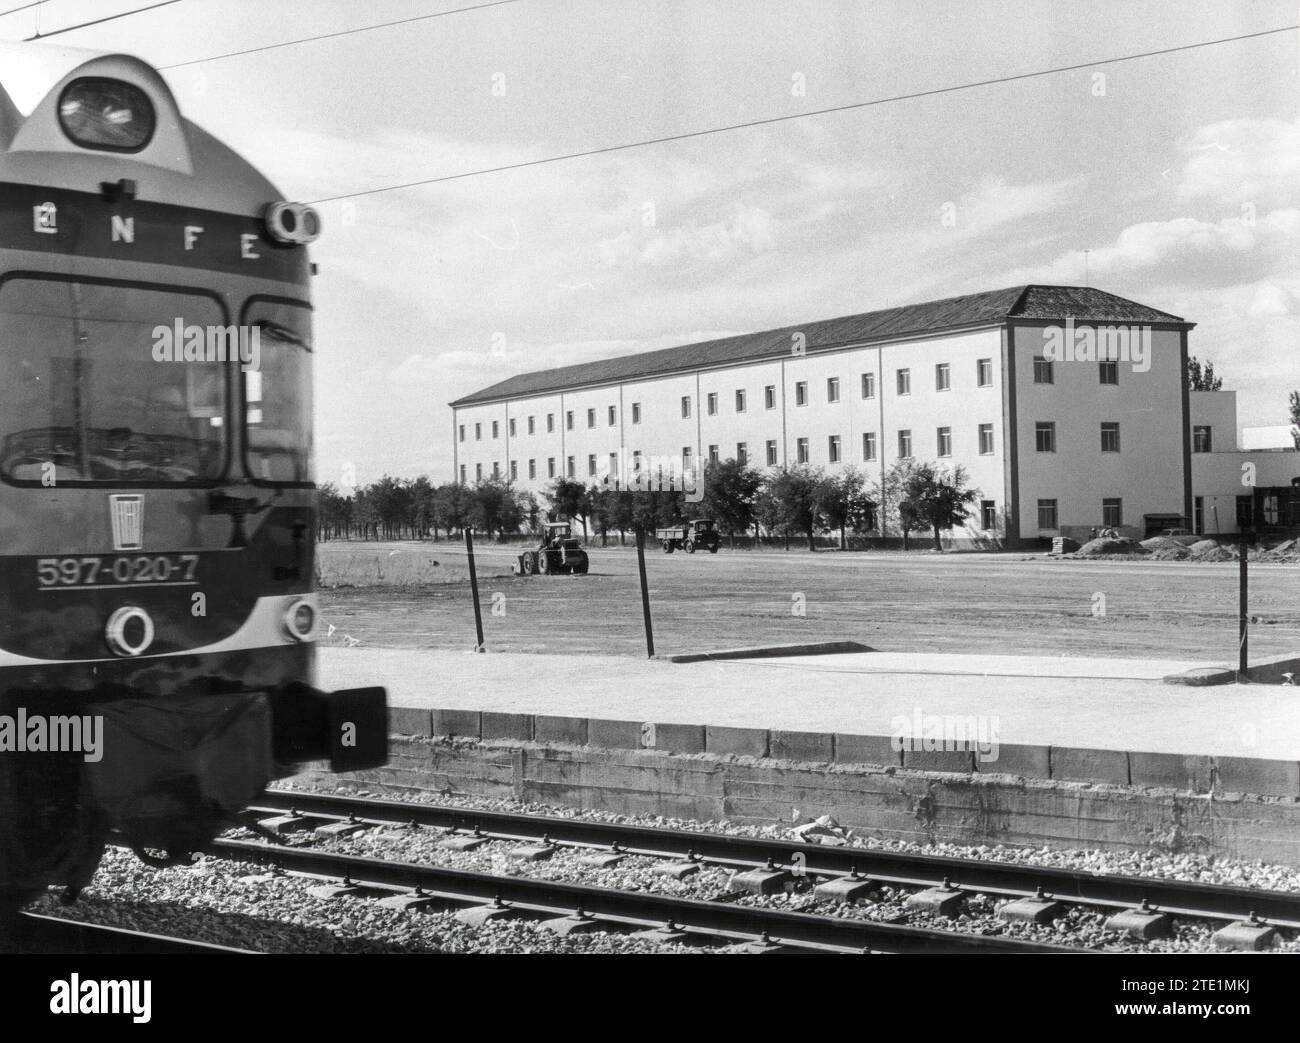 11/11/1975. The train enters the Campus. In Image, view of the campus of the University city of Alcalá de Henares (Madrid) with the train station very close to the Faculties. Credit: Album / Archivo ABC / Luis Ramírez Stock Photo